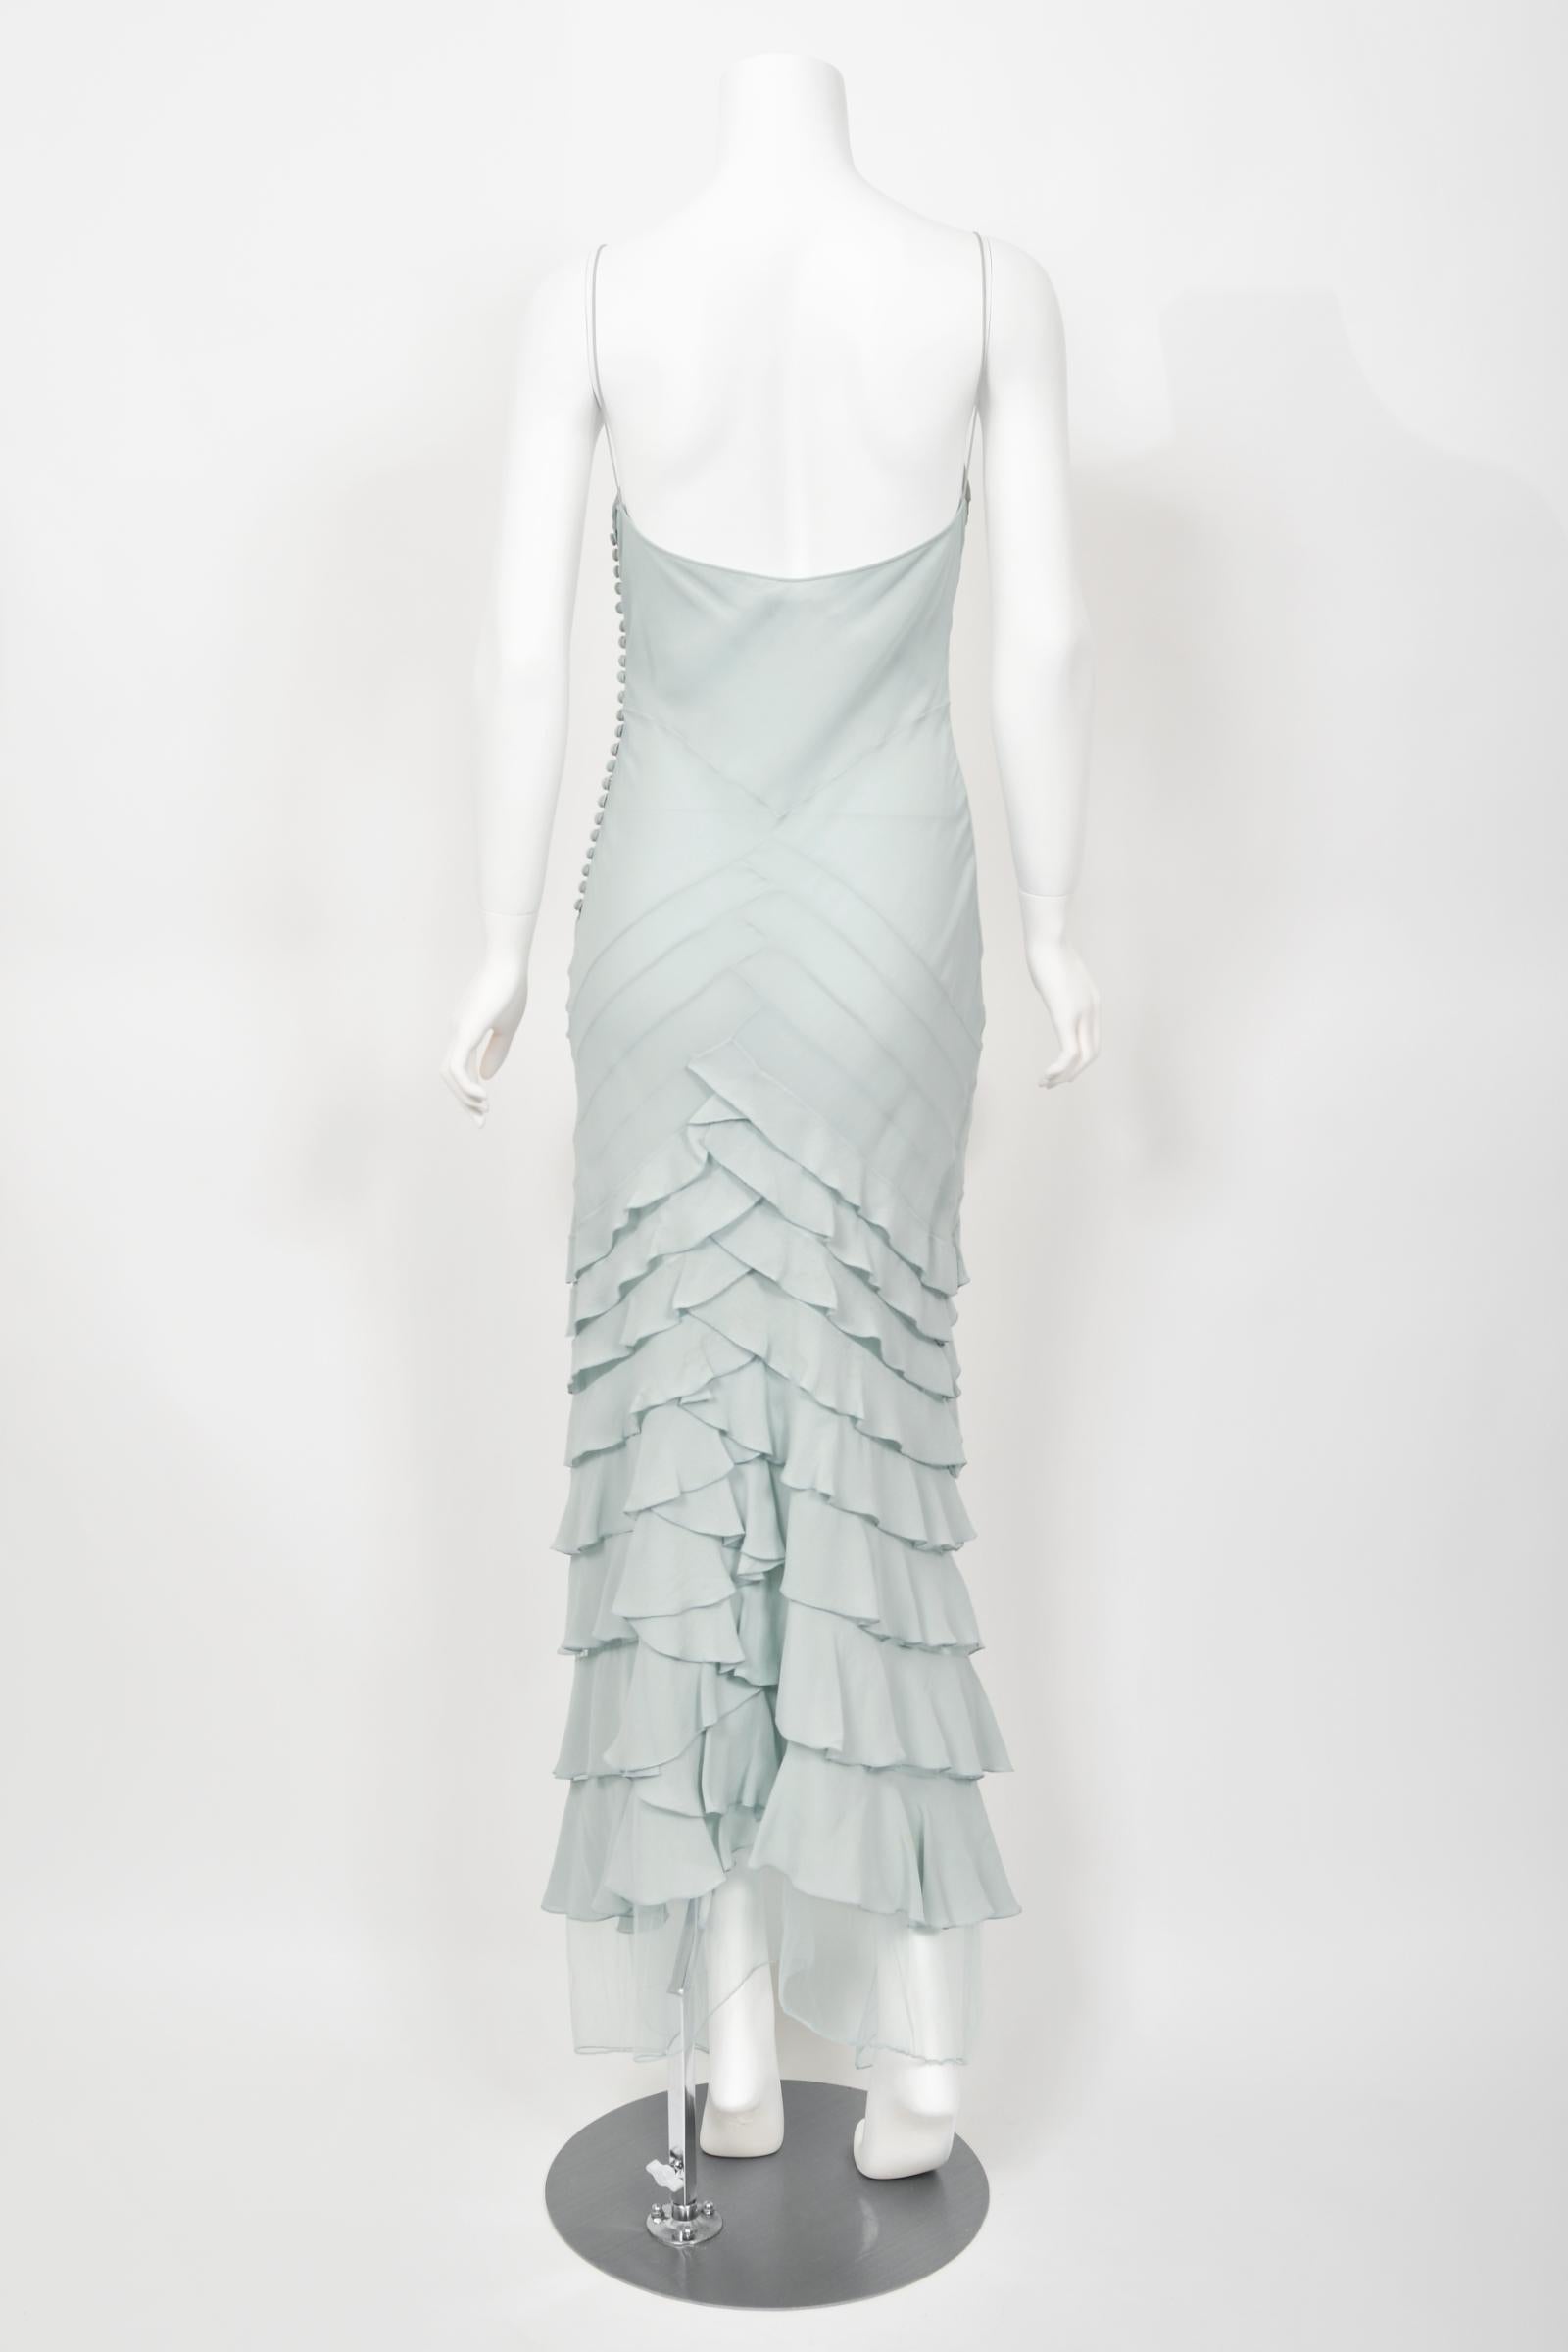 2004 Christian Dior by John Galliano Ice-Blue Silk & Tulle Tiered Bias-Cut Gown 12